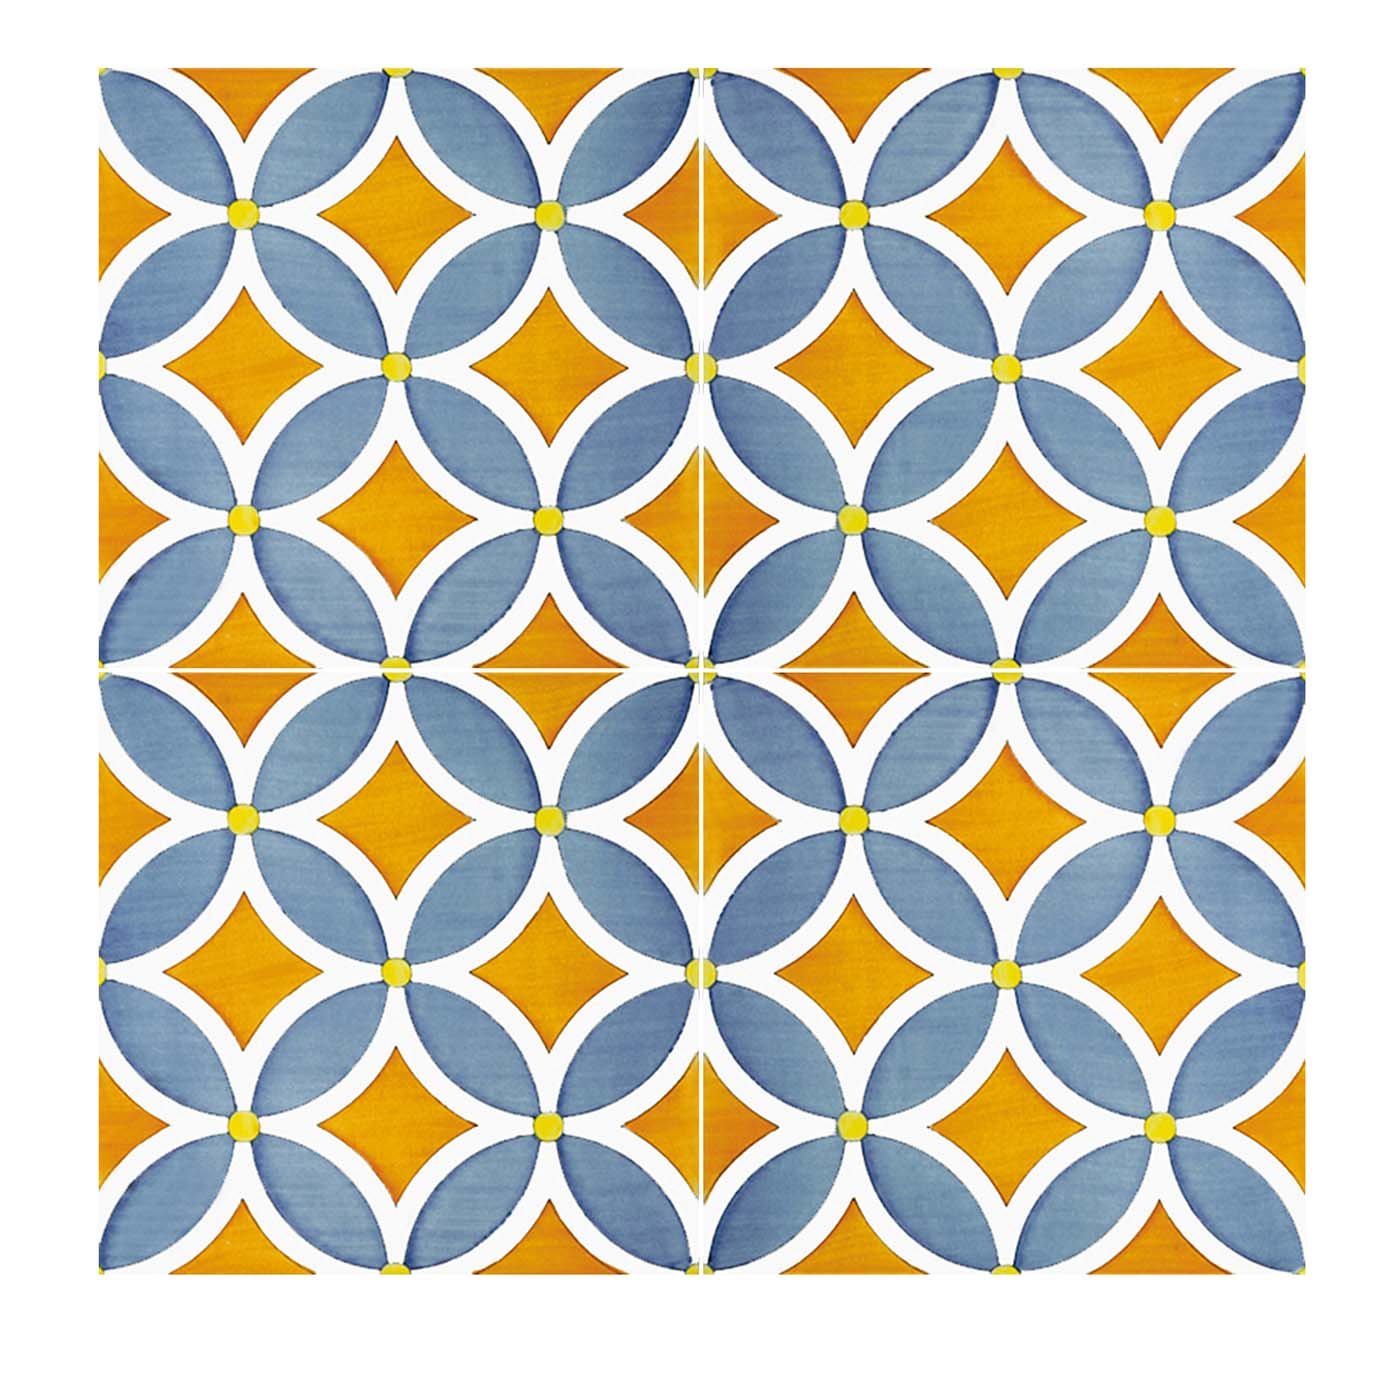 Set of 25 Tiles Lineamenti Plagiano - Main view